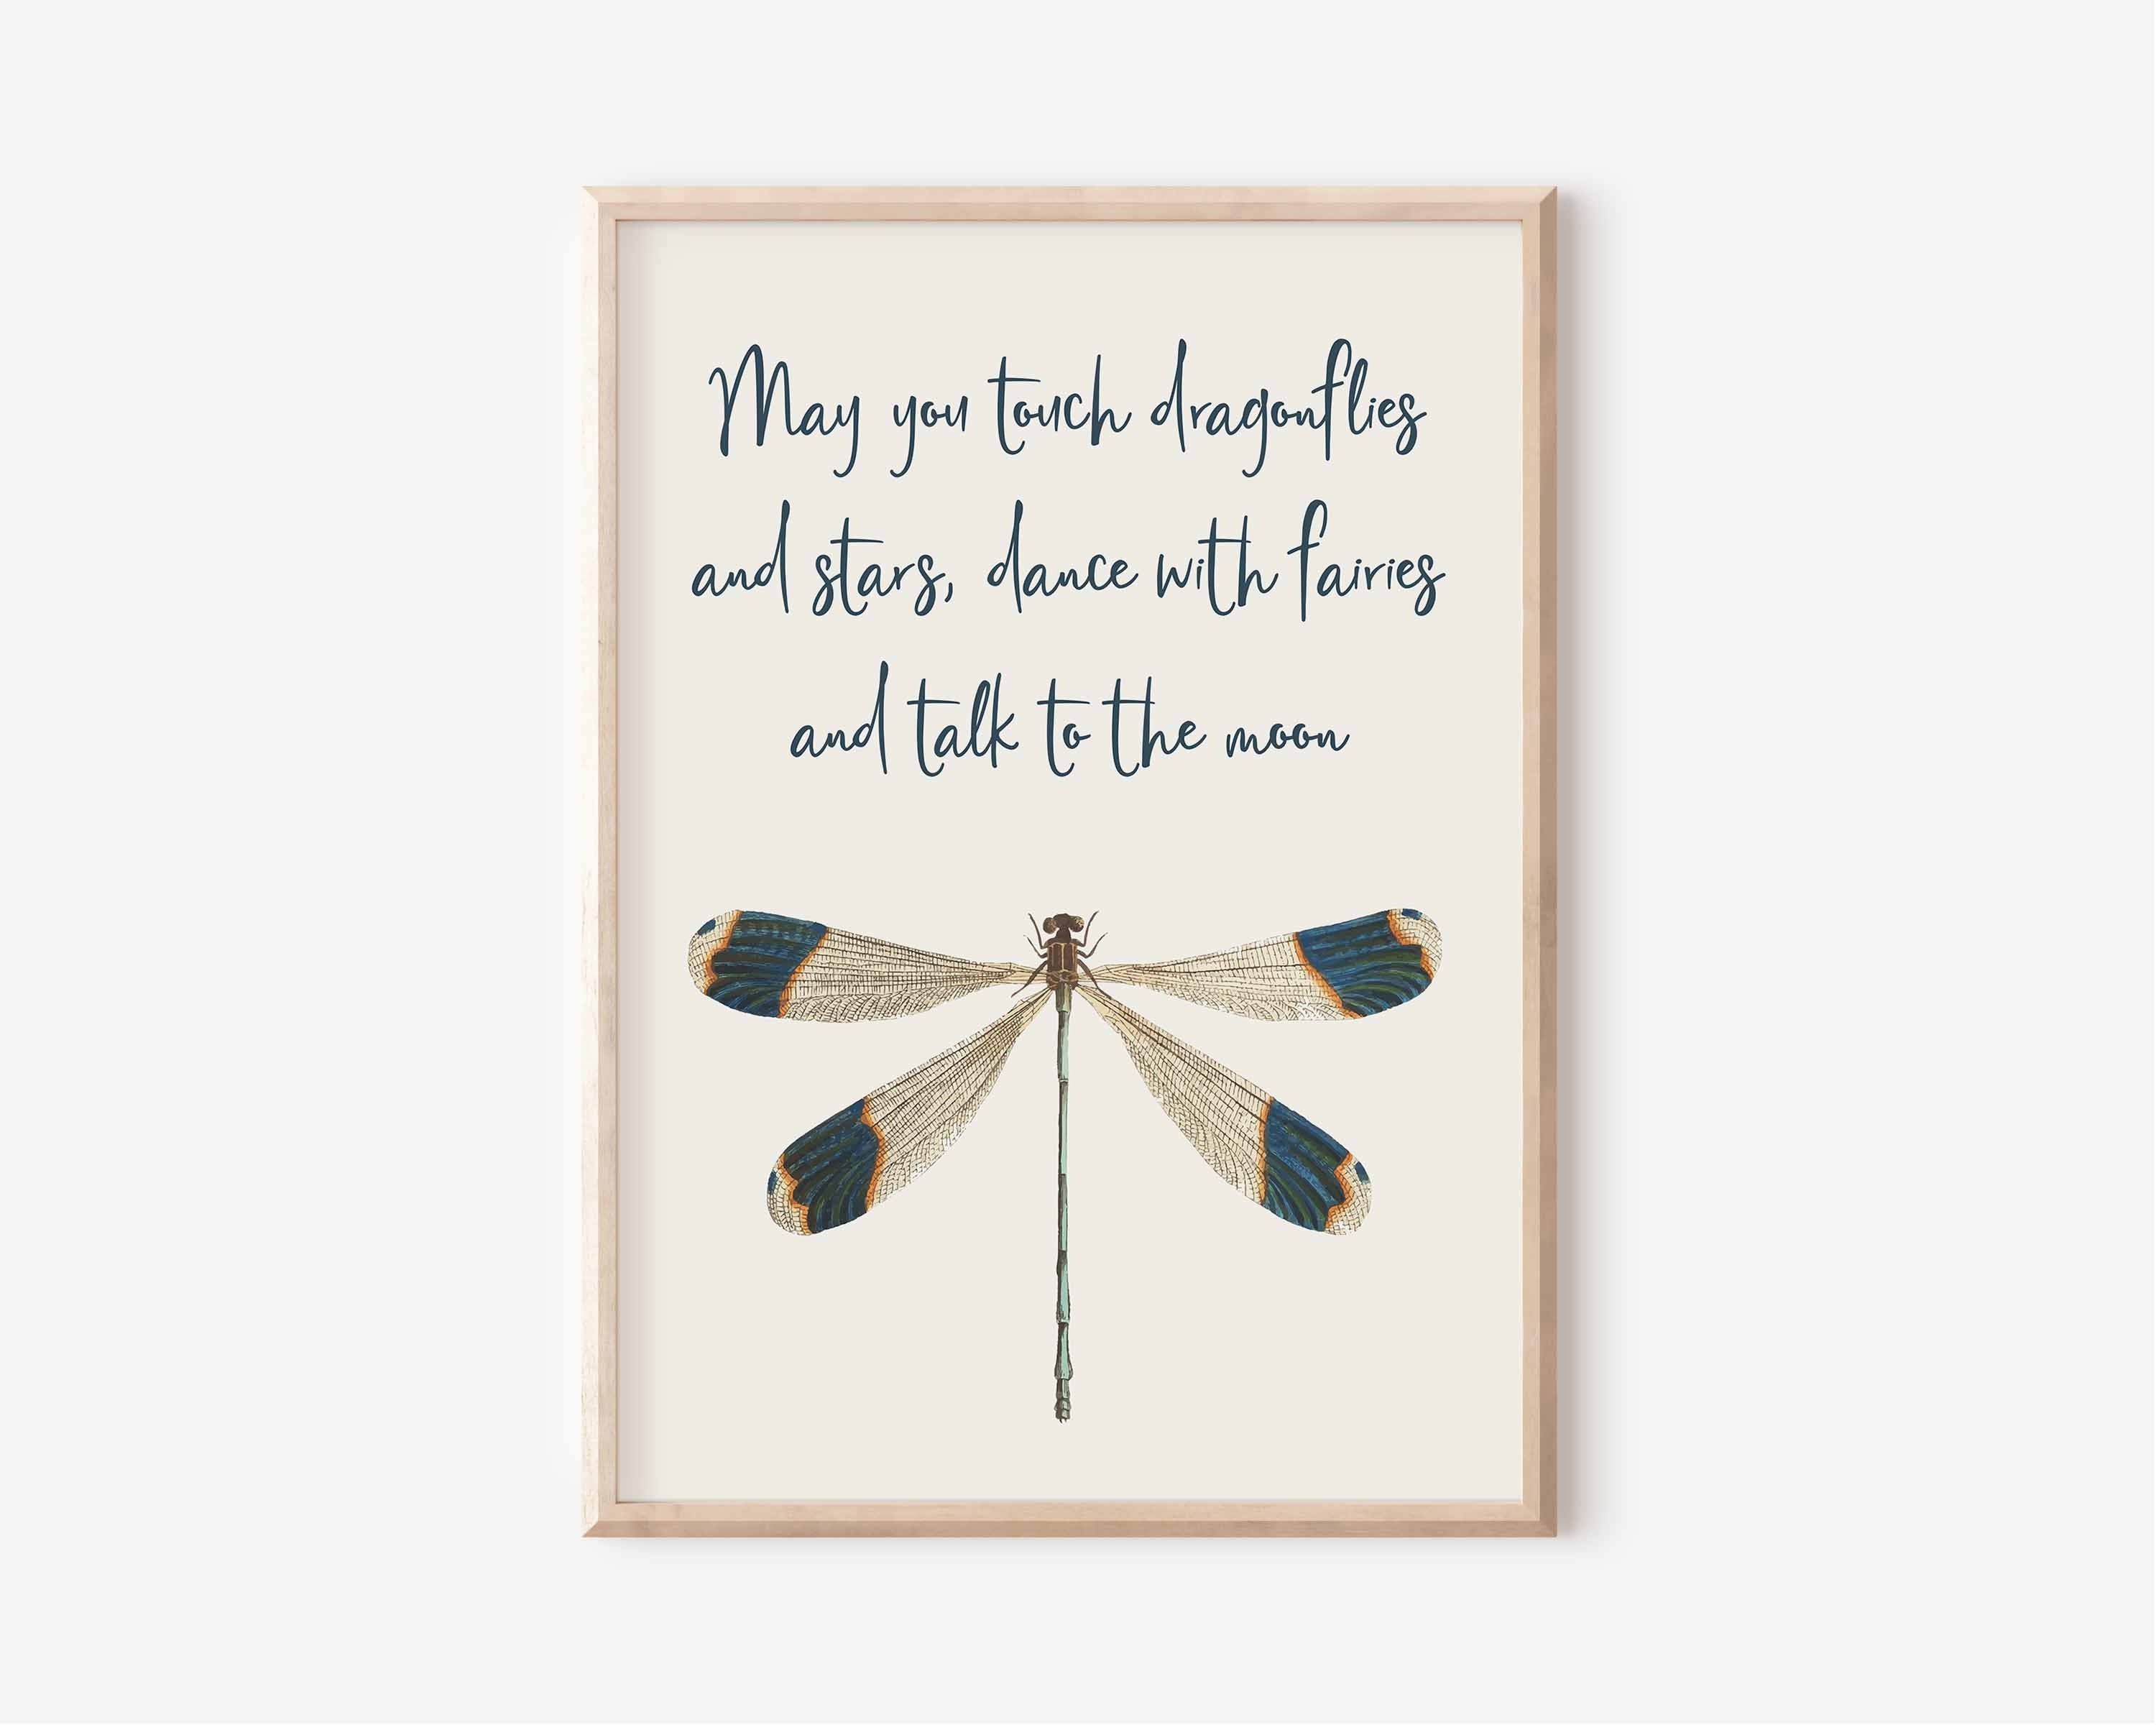 Dragonfly Quote May You Touch Dragonflies And Stars Dance Etsy Uk